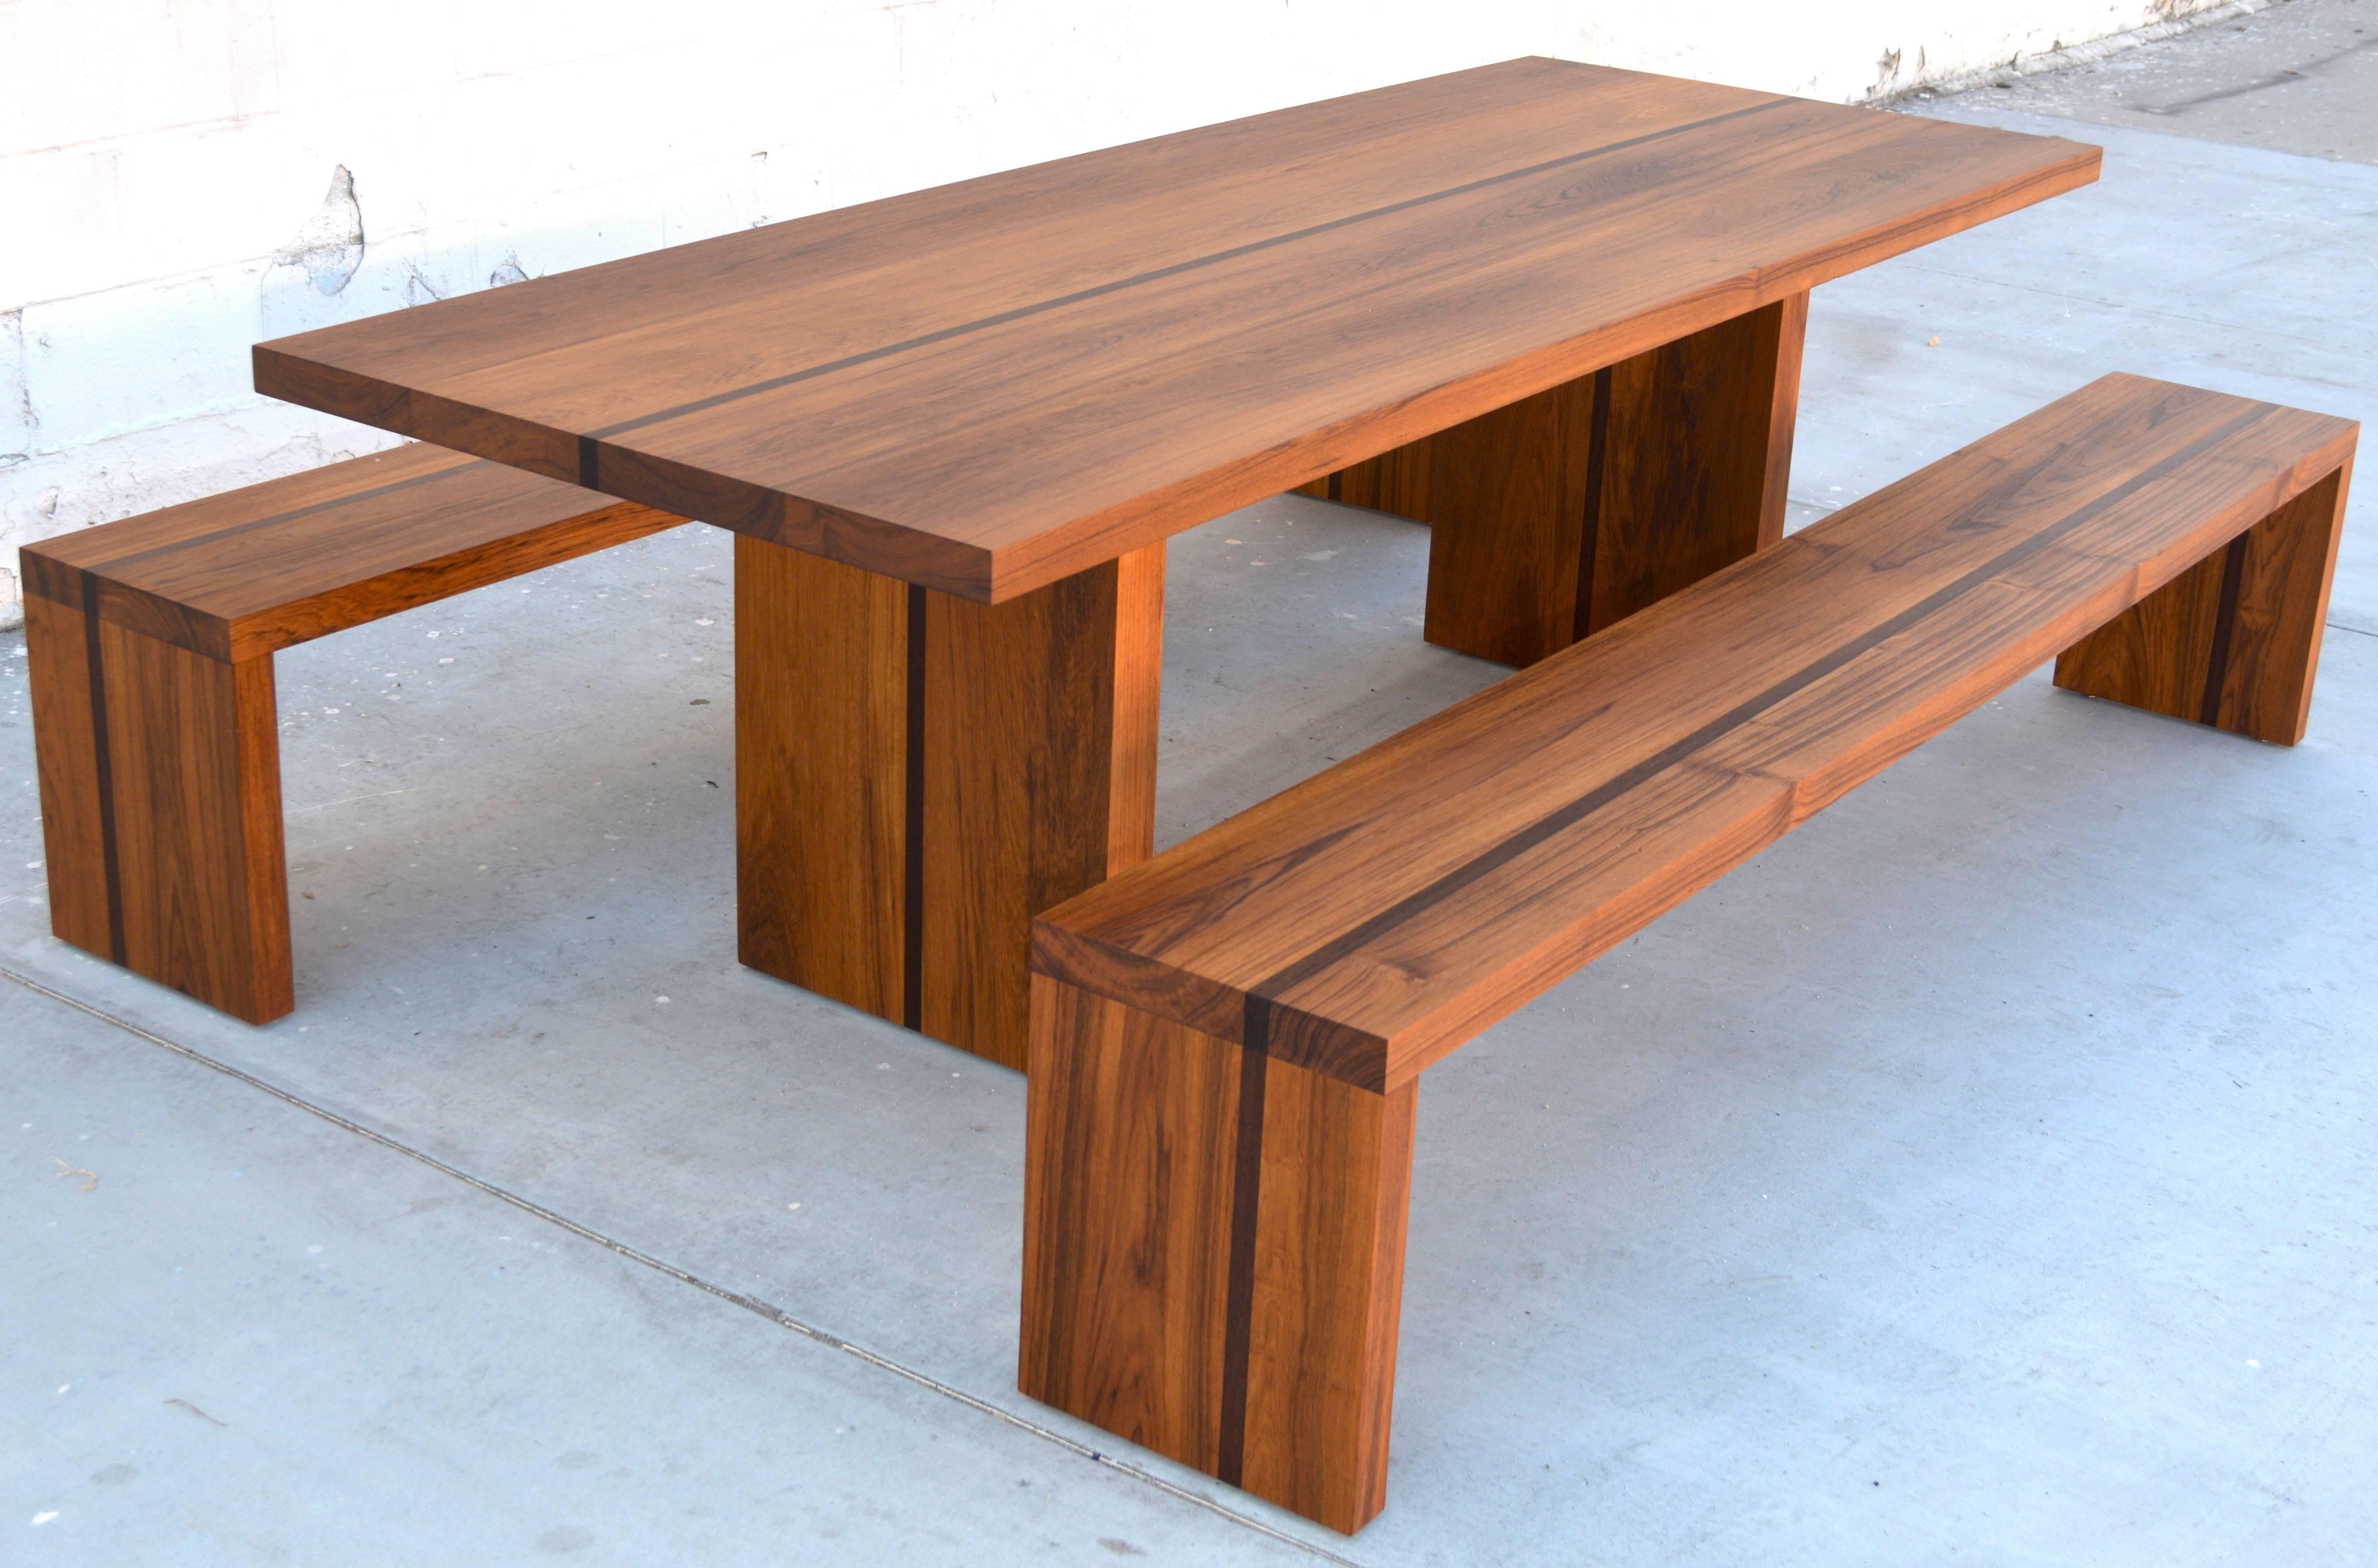 This sturdy table and benches made from teak and wenge wood are designed to withstand any climate. The legs are reinforced with 1/2 thick steel plates and have adjustable feet. While this particular set is finished in tropical rosewood oil (with 99%